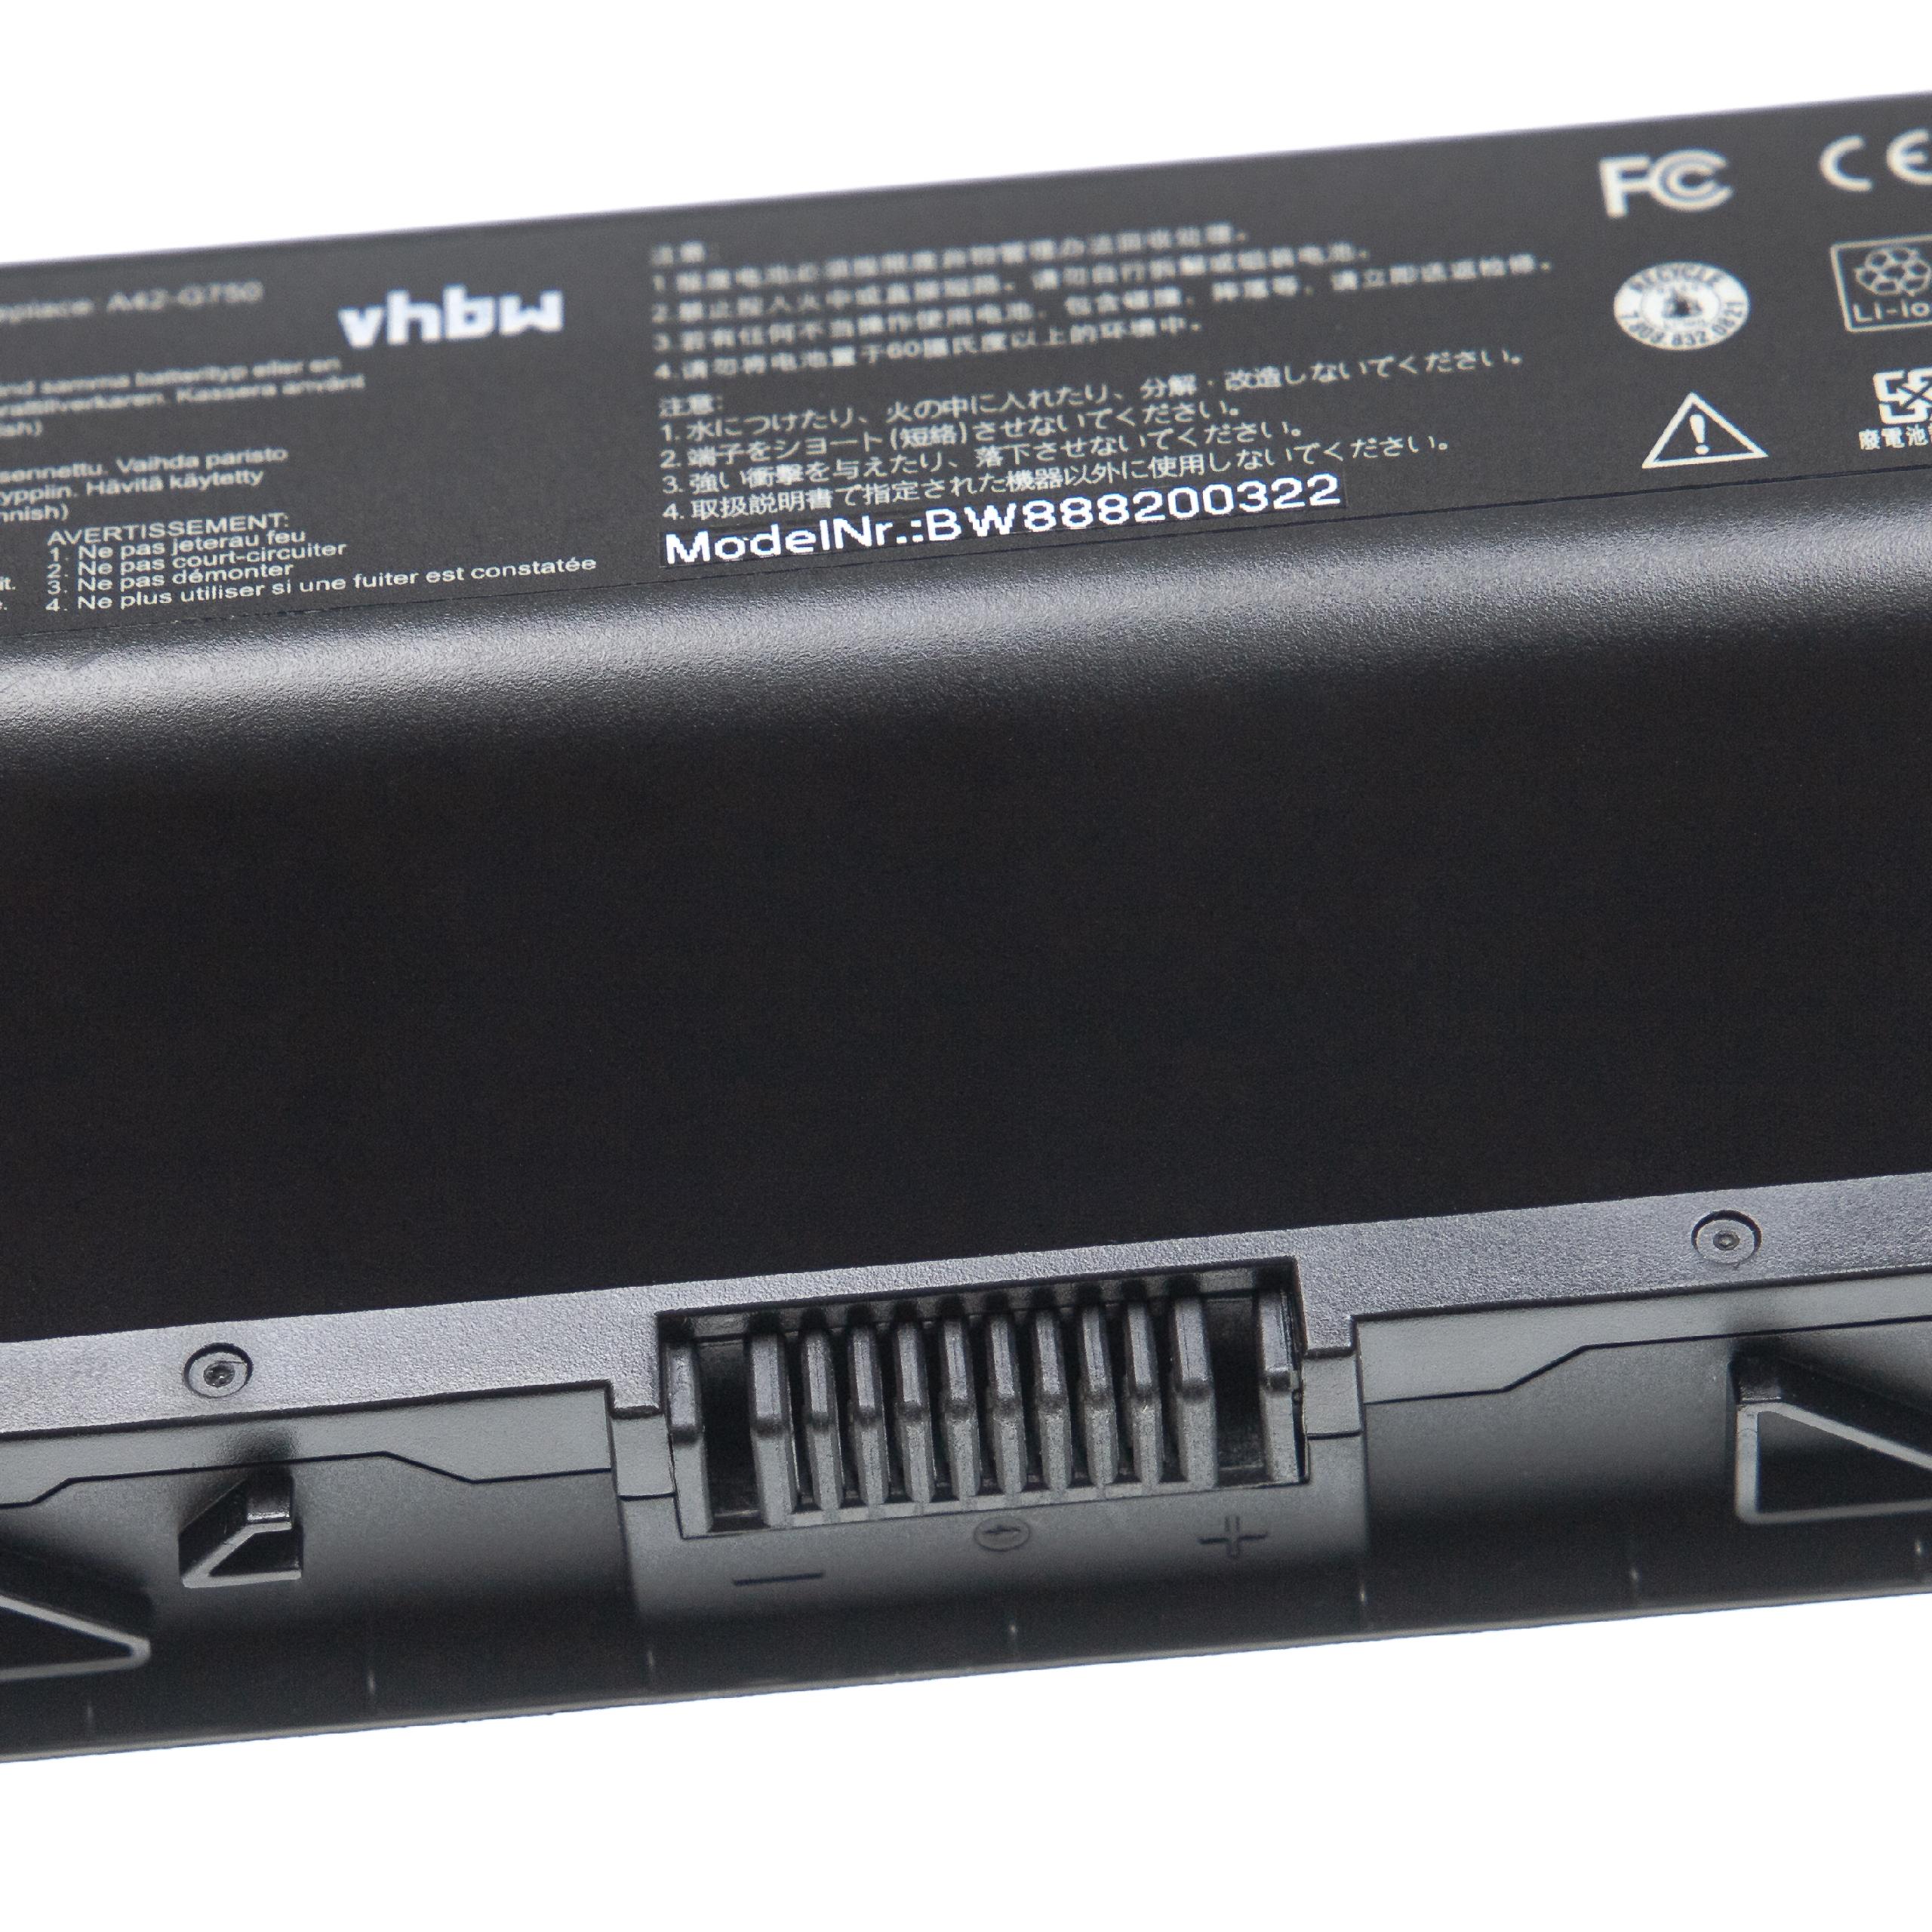 Notebook Battery Replacement for Asus A42-G750 - 4400mAh 14.8V Li-Ion, black